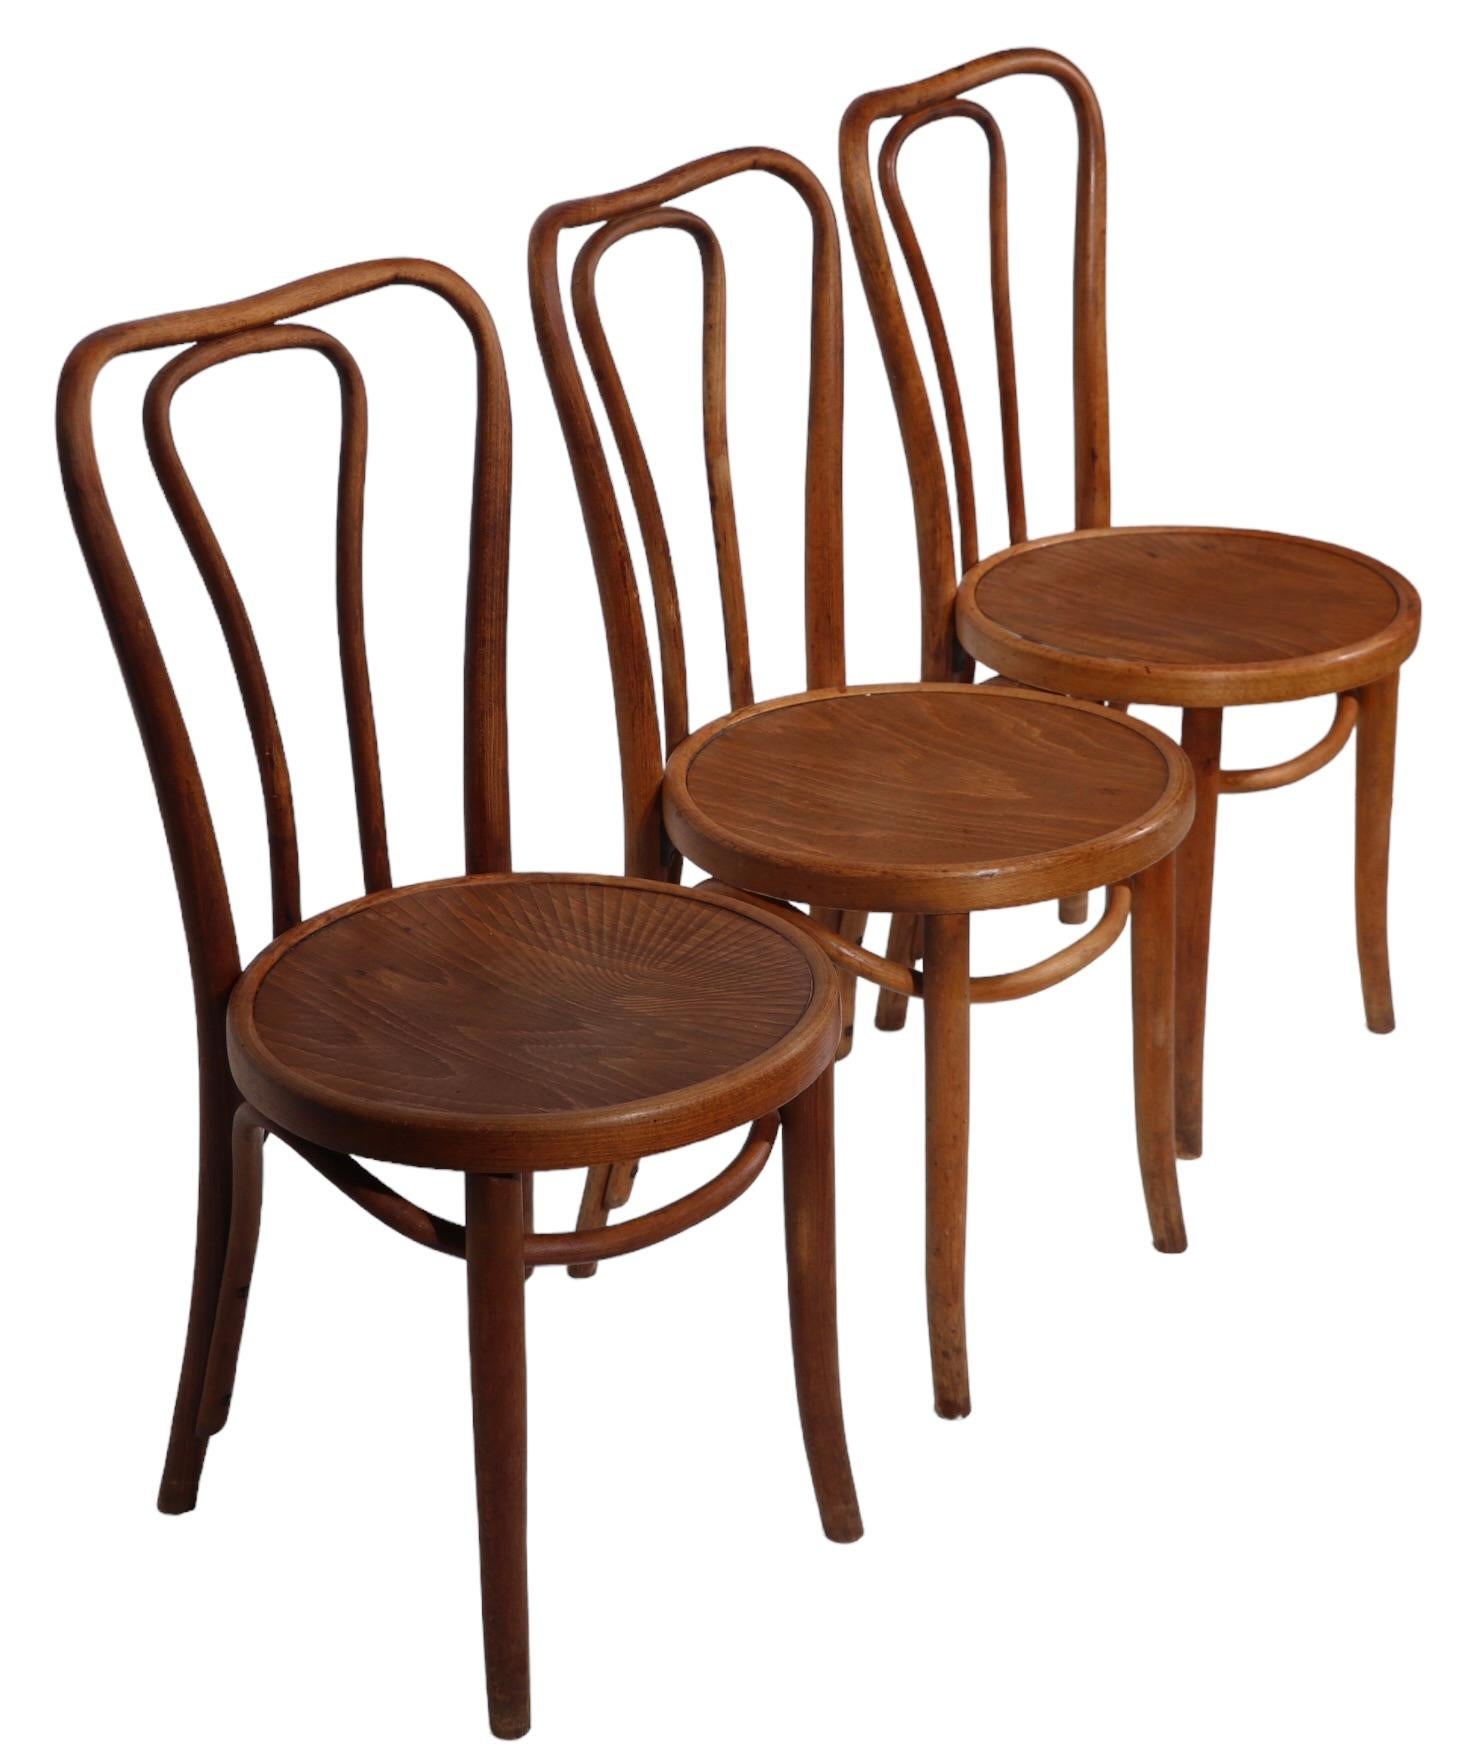 Classic cafe, bistro, dining  chair (s), attributed to Thonet. Constructed of steam bent beech wood, with original pressed wood seats. Executed in the Vienna Secessionist style, circa 1920/1950, made in Poland.  We have three of these available,